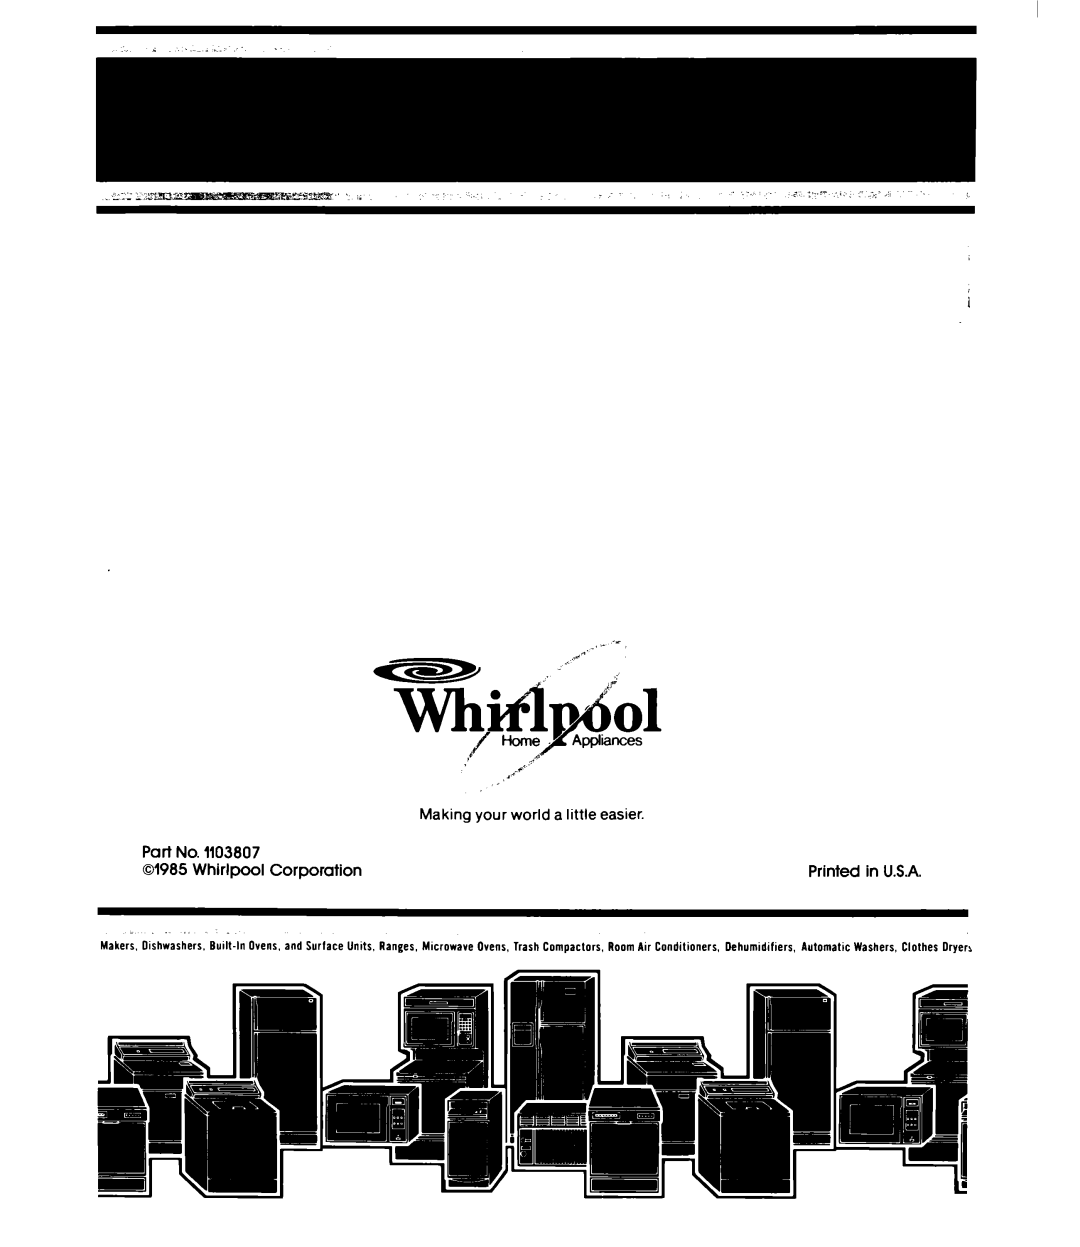 Whirlpool EL11PC manual Making your world a little easier, Whirlpool Corporation 